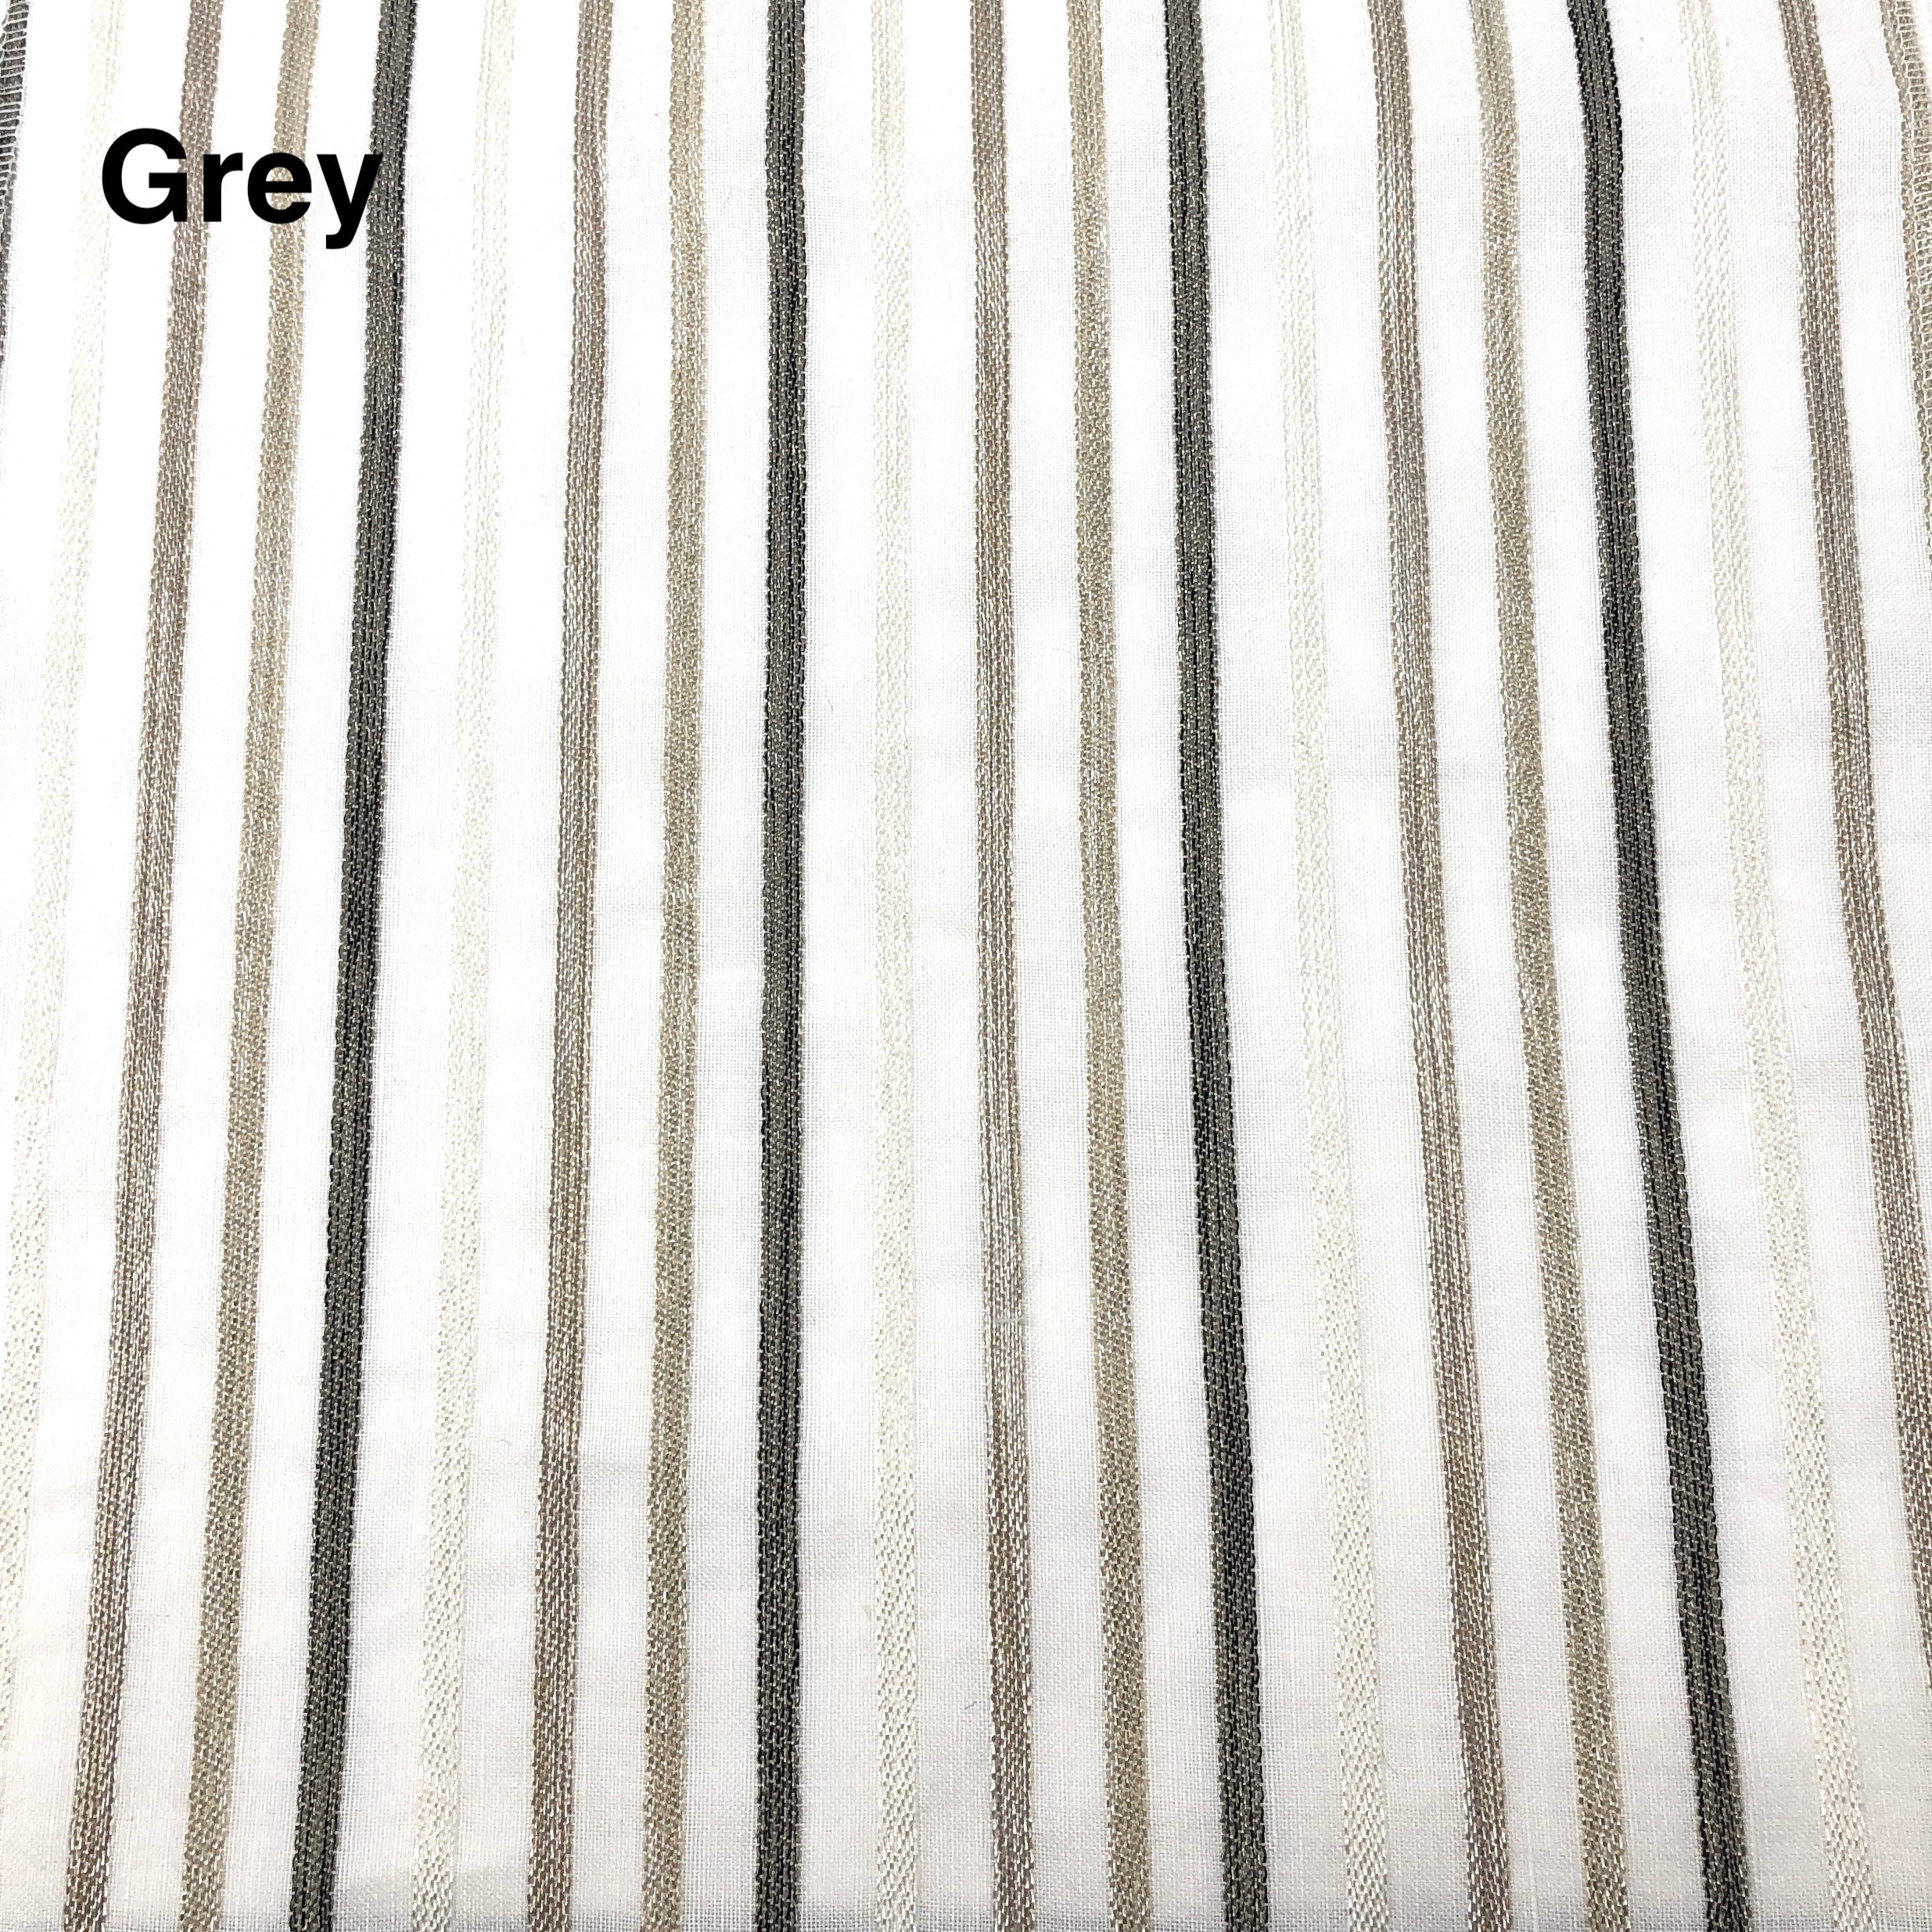 Multi Stripe Linen Blend Embroidered Grey Indigo Stripe Sheer Fabric By The Yard, Curtain, Drapery, Table Top, 118" Width/CL1033